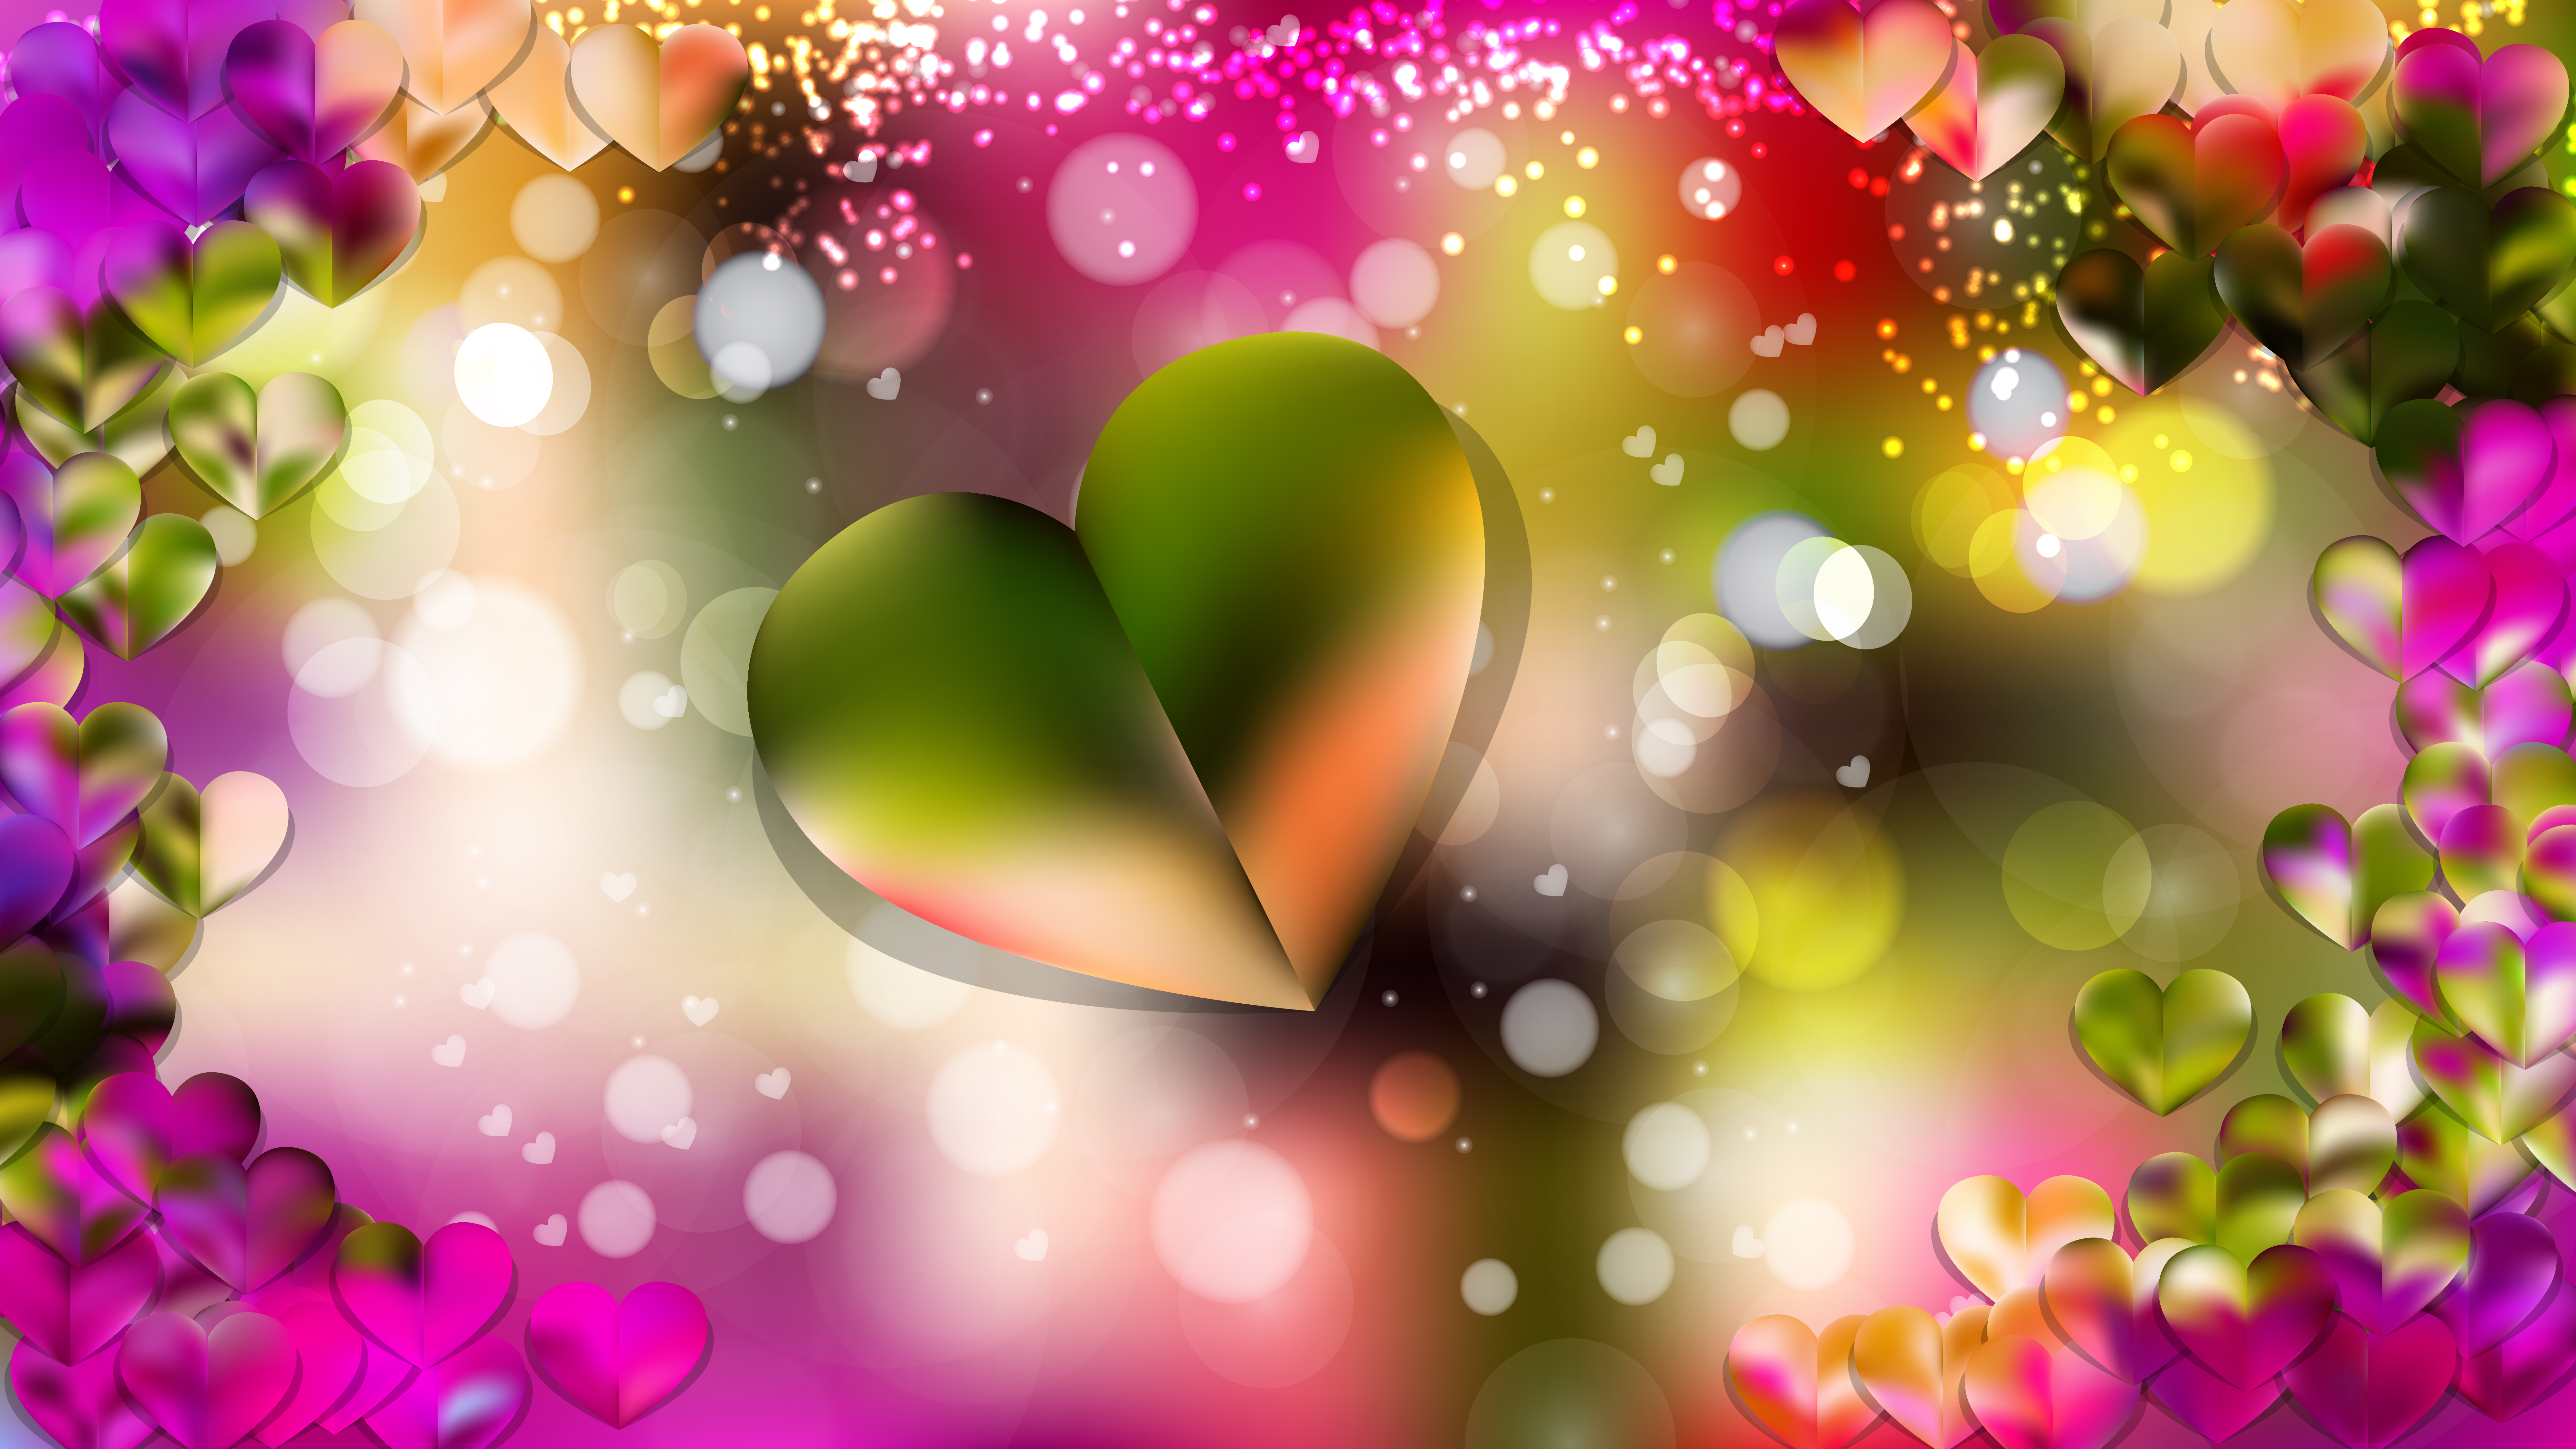 Green Heart Background Images HD Pictures and Wallpaper For Free Download   Pngtree